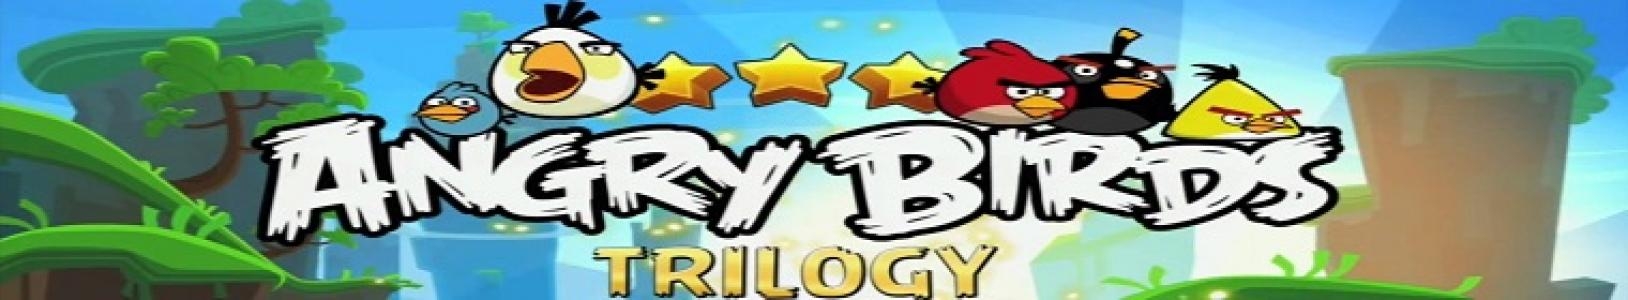 Angry Birds Trilogy banner